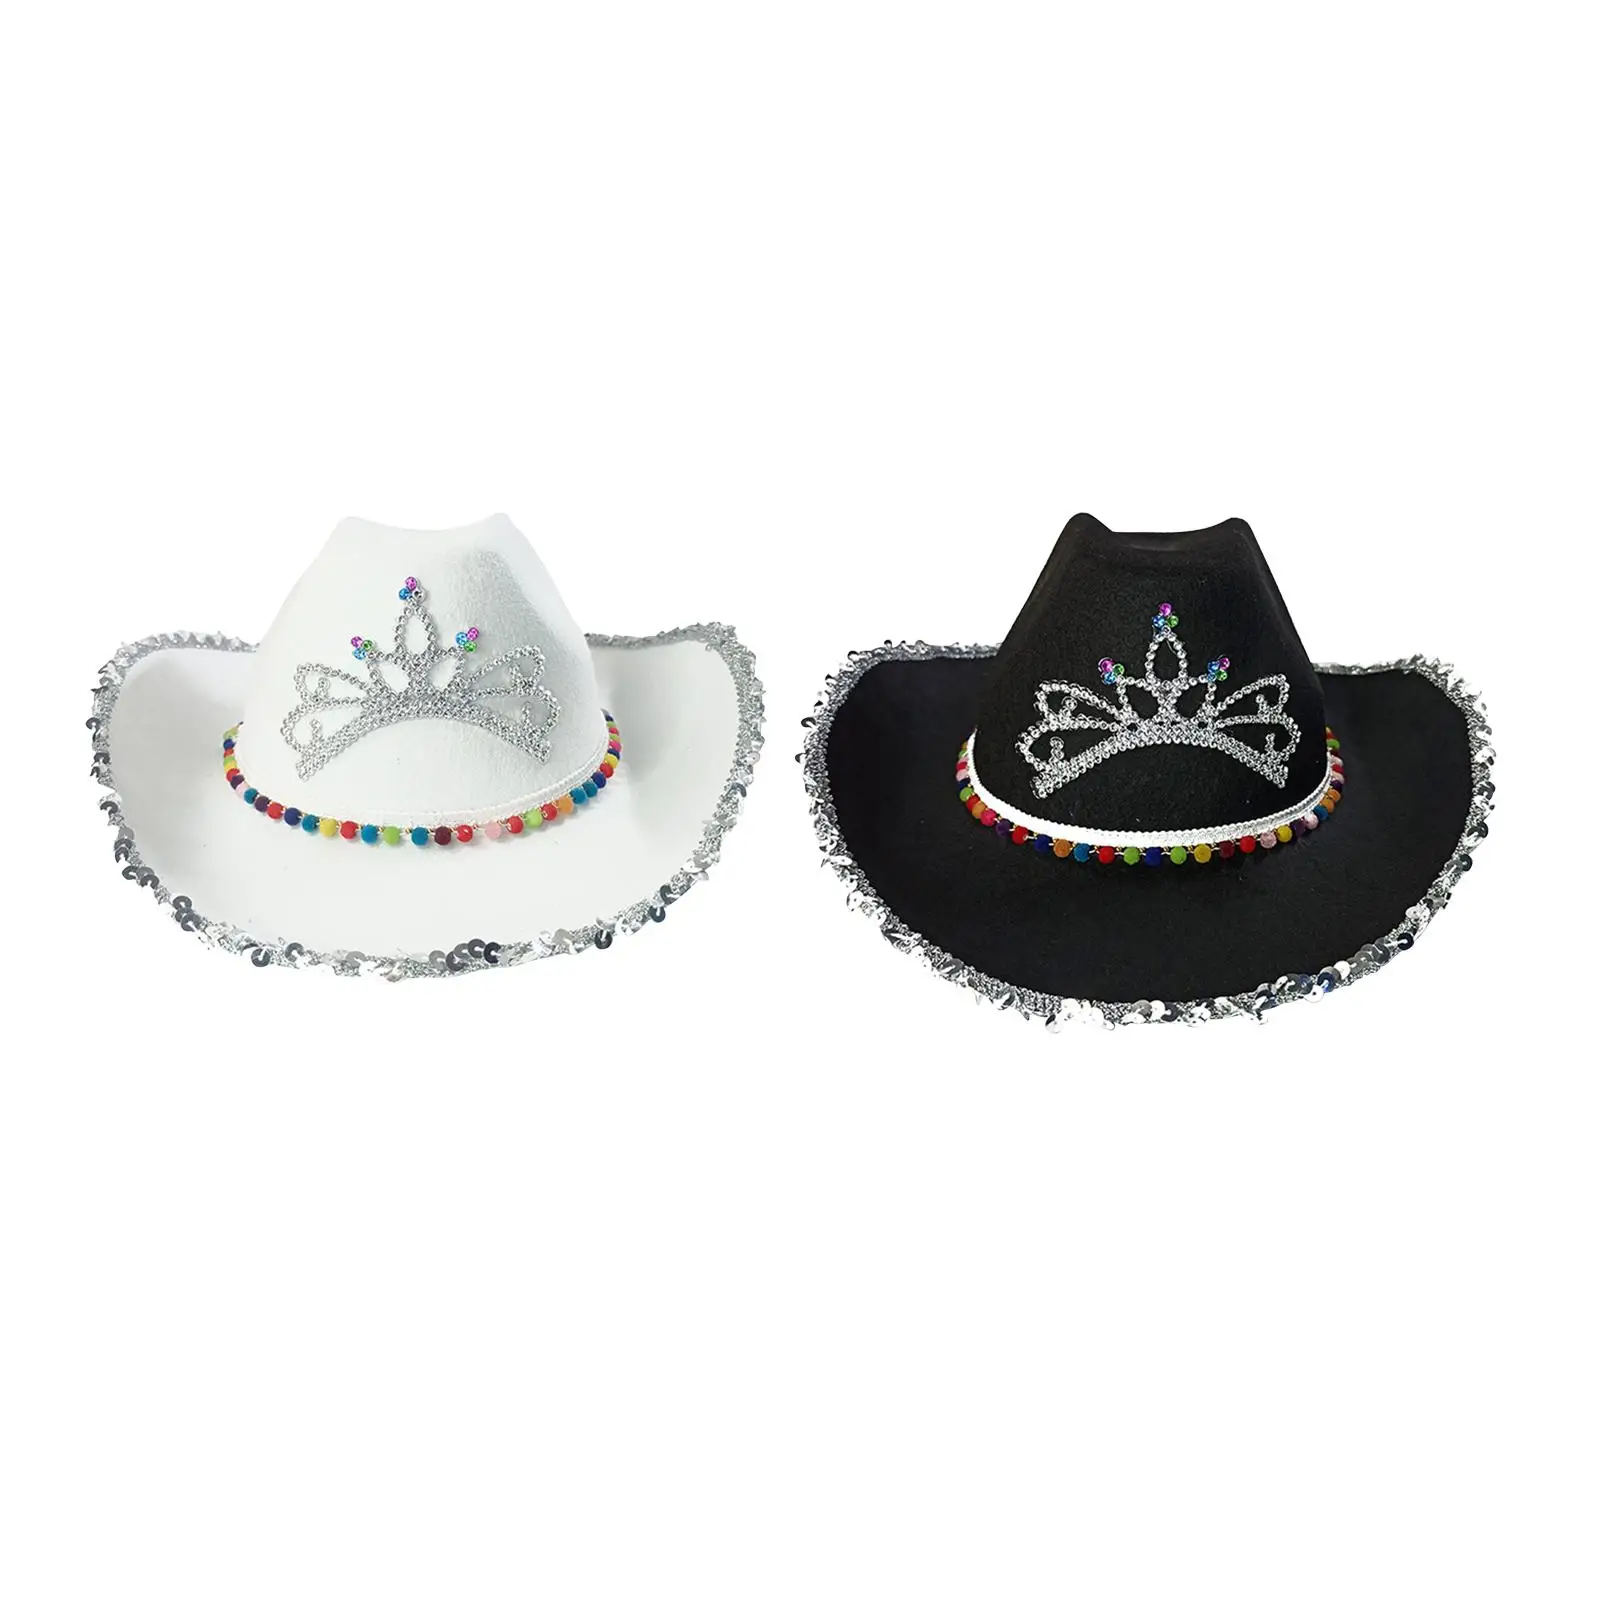 Fashion Western Cowboy Size Fits Most Wide Brim Party Favors Fancy Dress for Party Ladies Birthday Teens Holiday